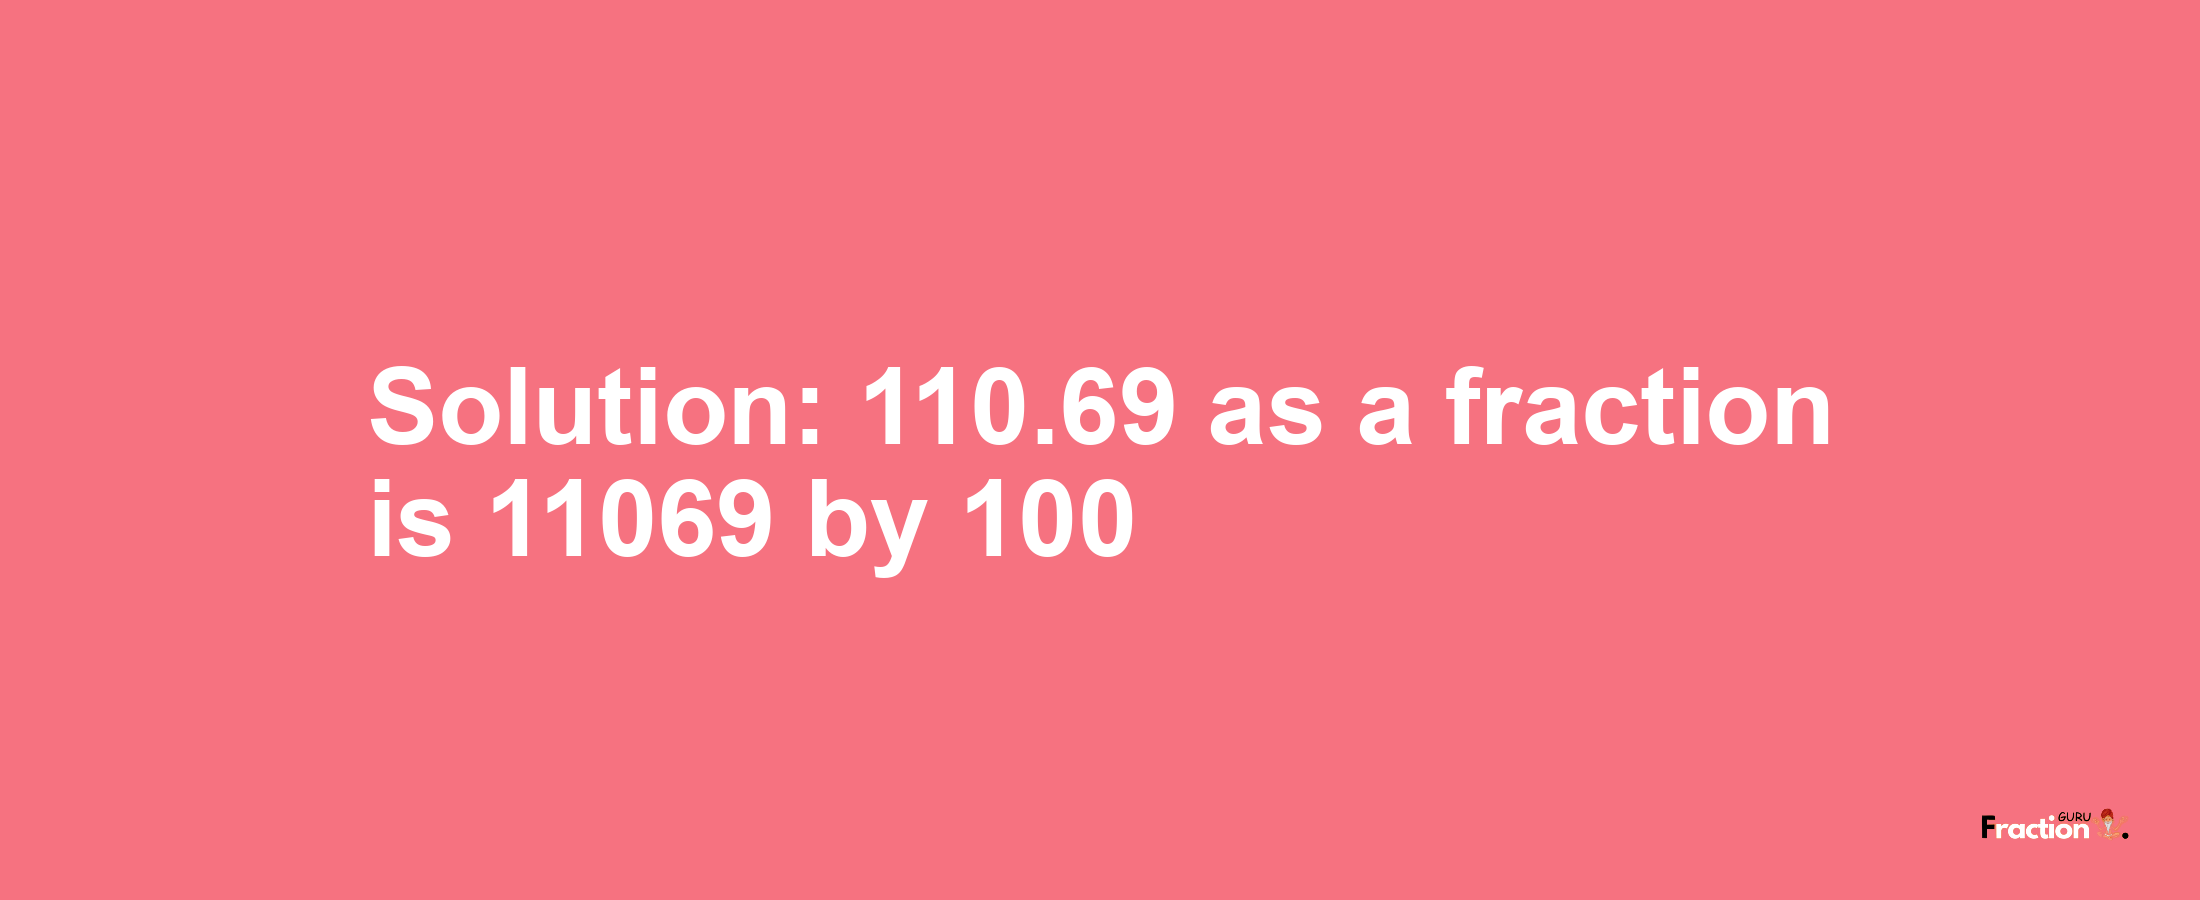 Solution:110.69 as a fraction is 11069/100